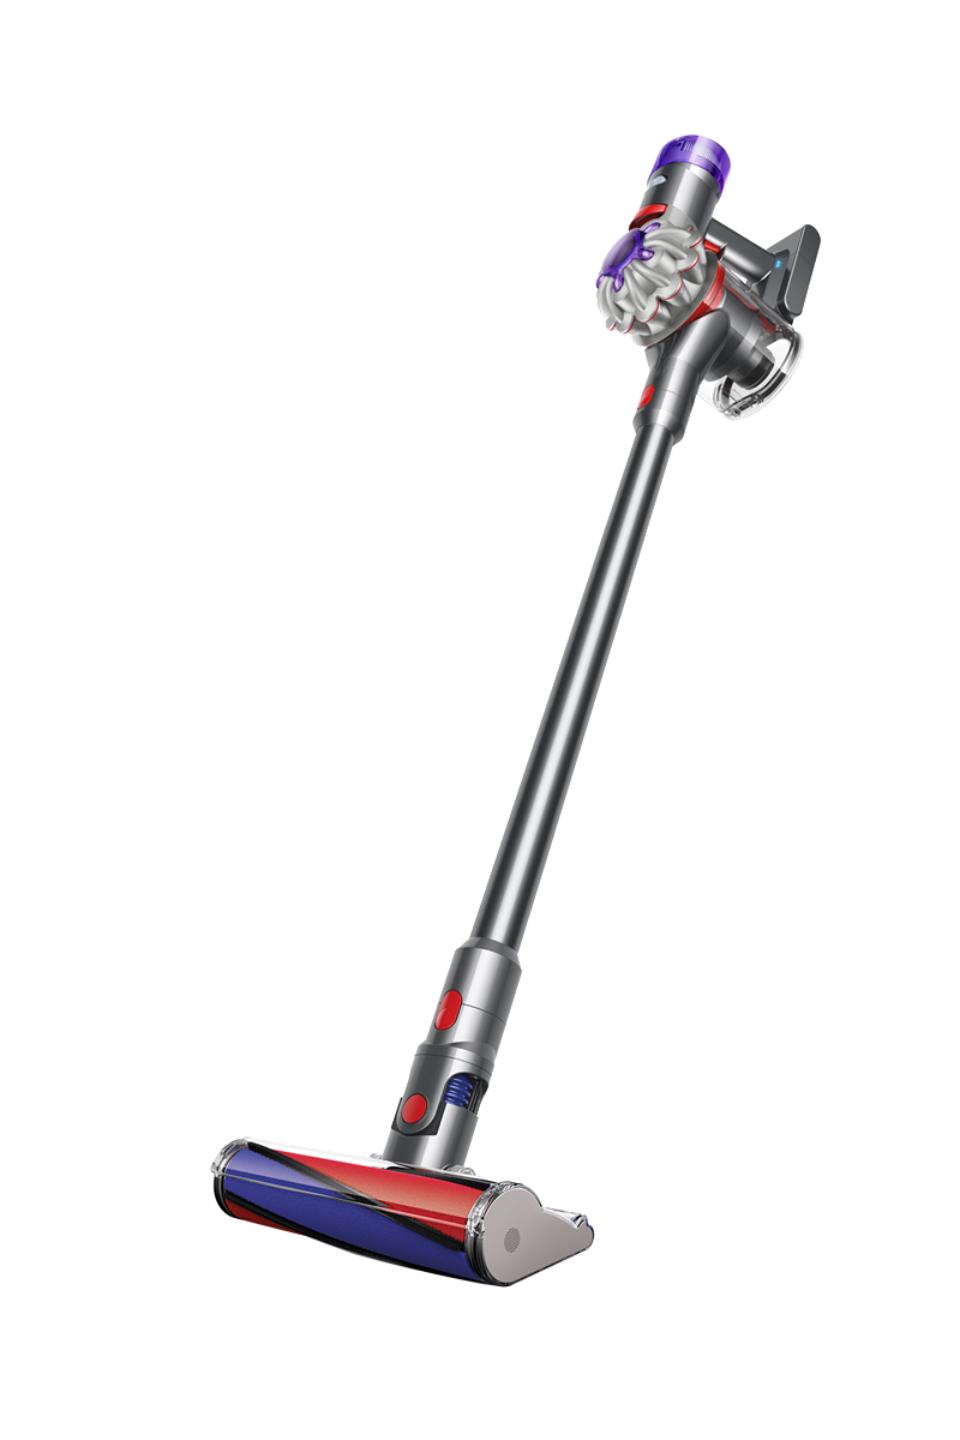 Dyson (214730-01) V8 Absolute Cordless Stick Vacuum Cleaner